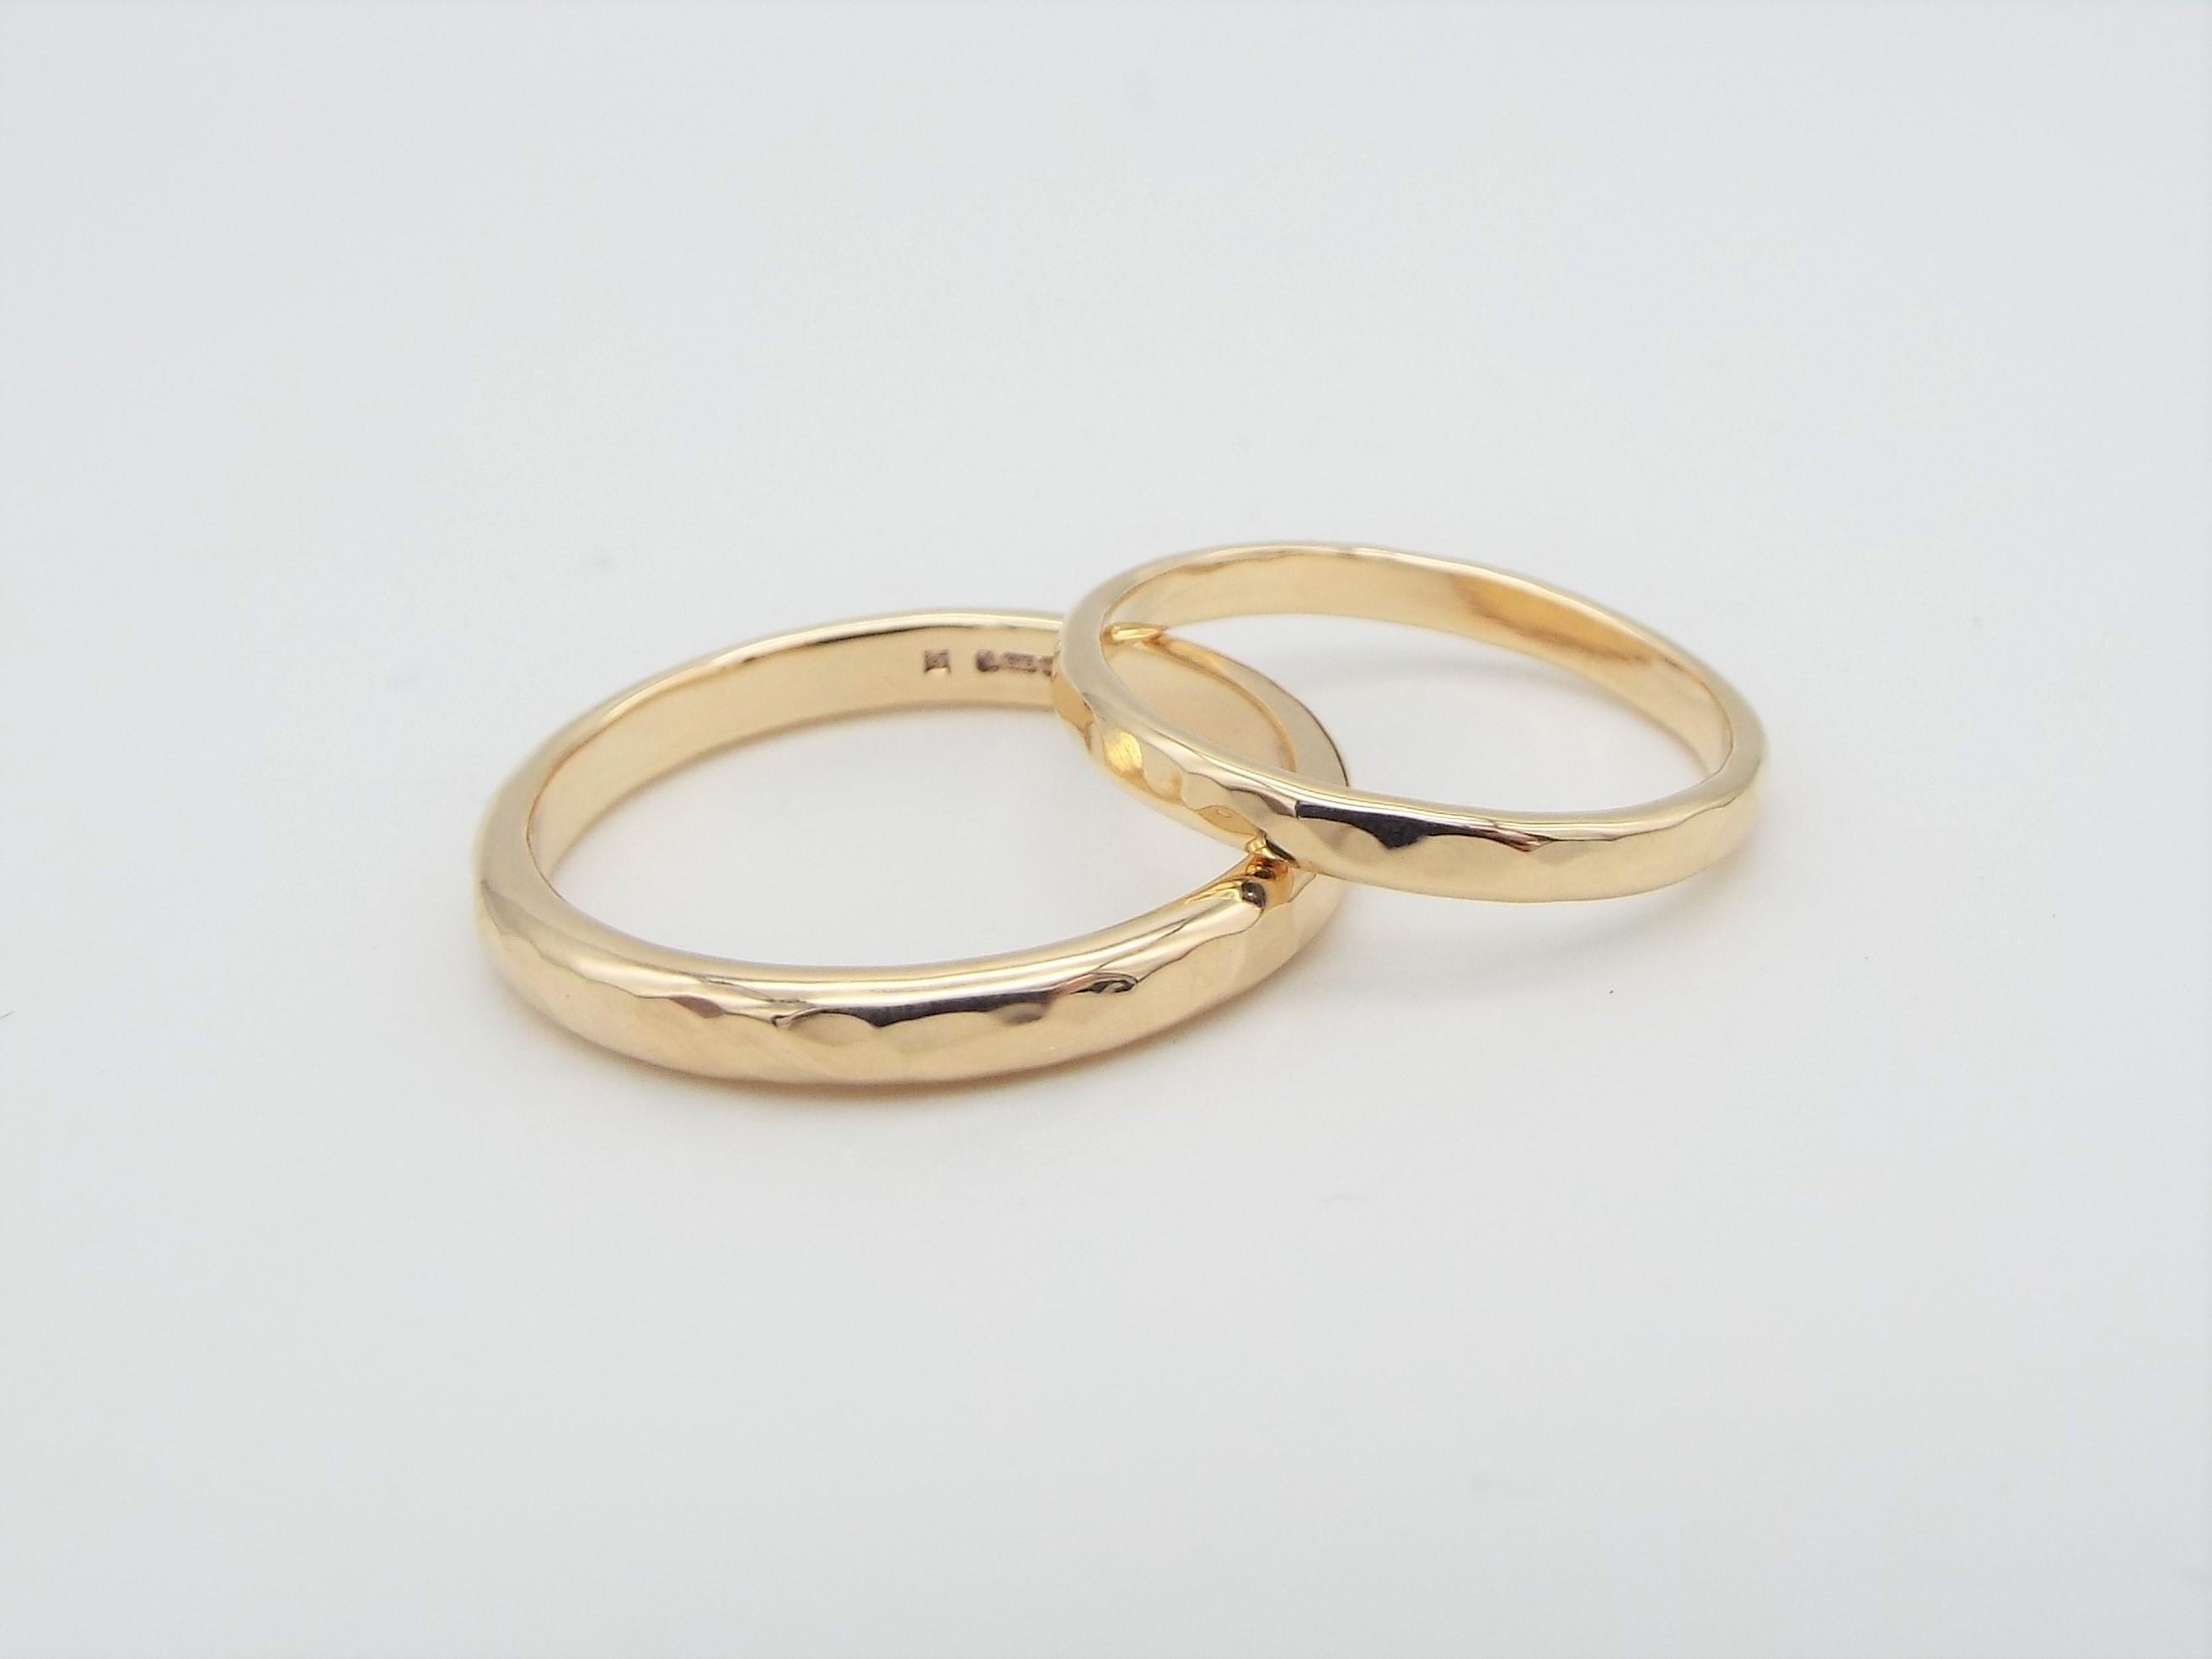 hammered finish matching gold wedding rings